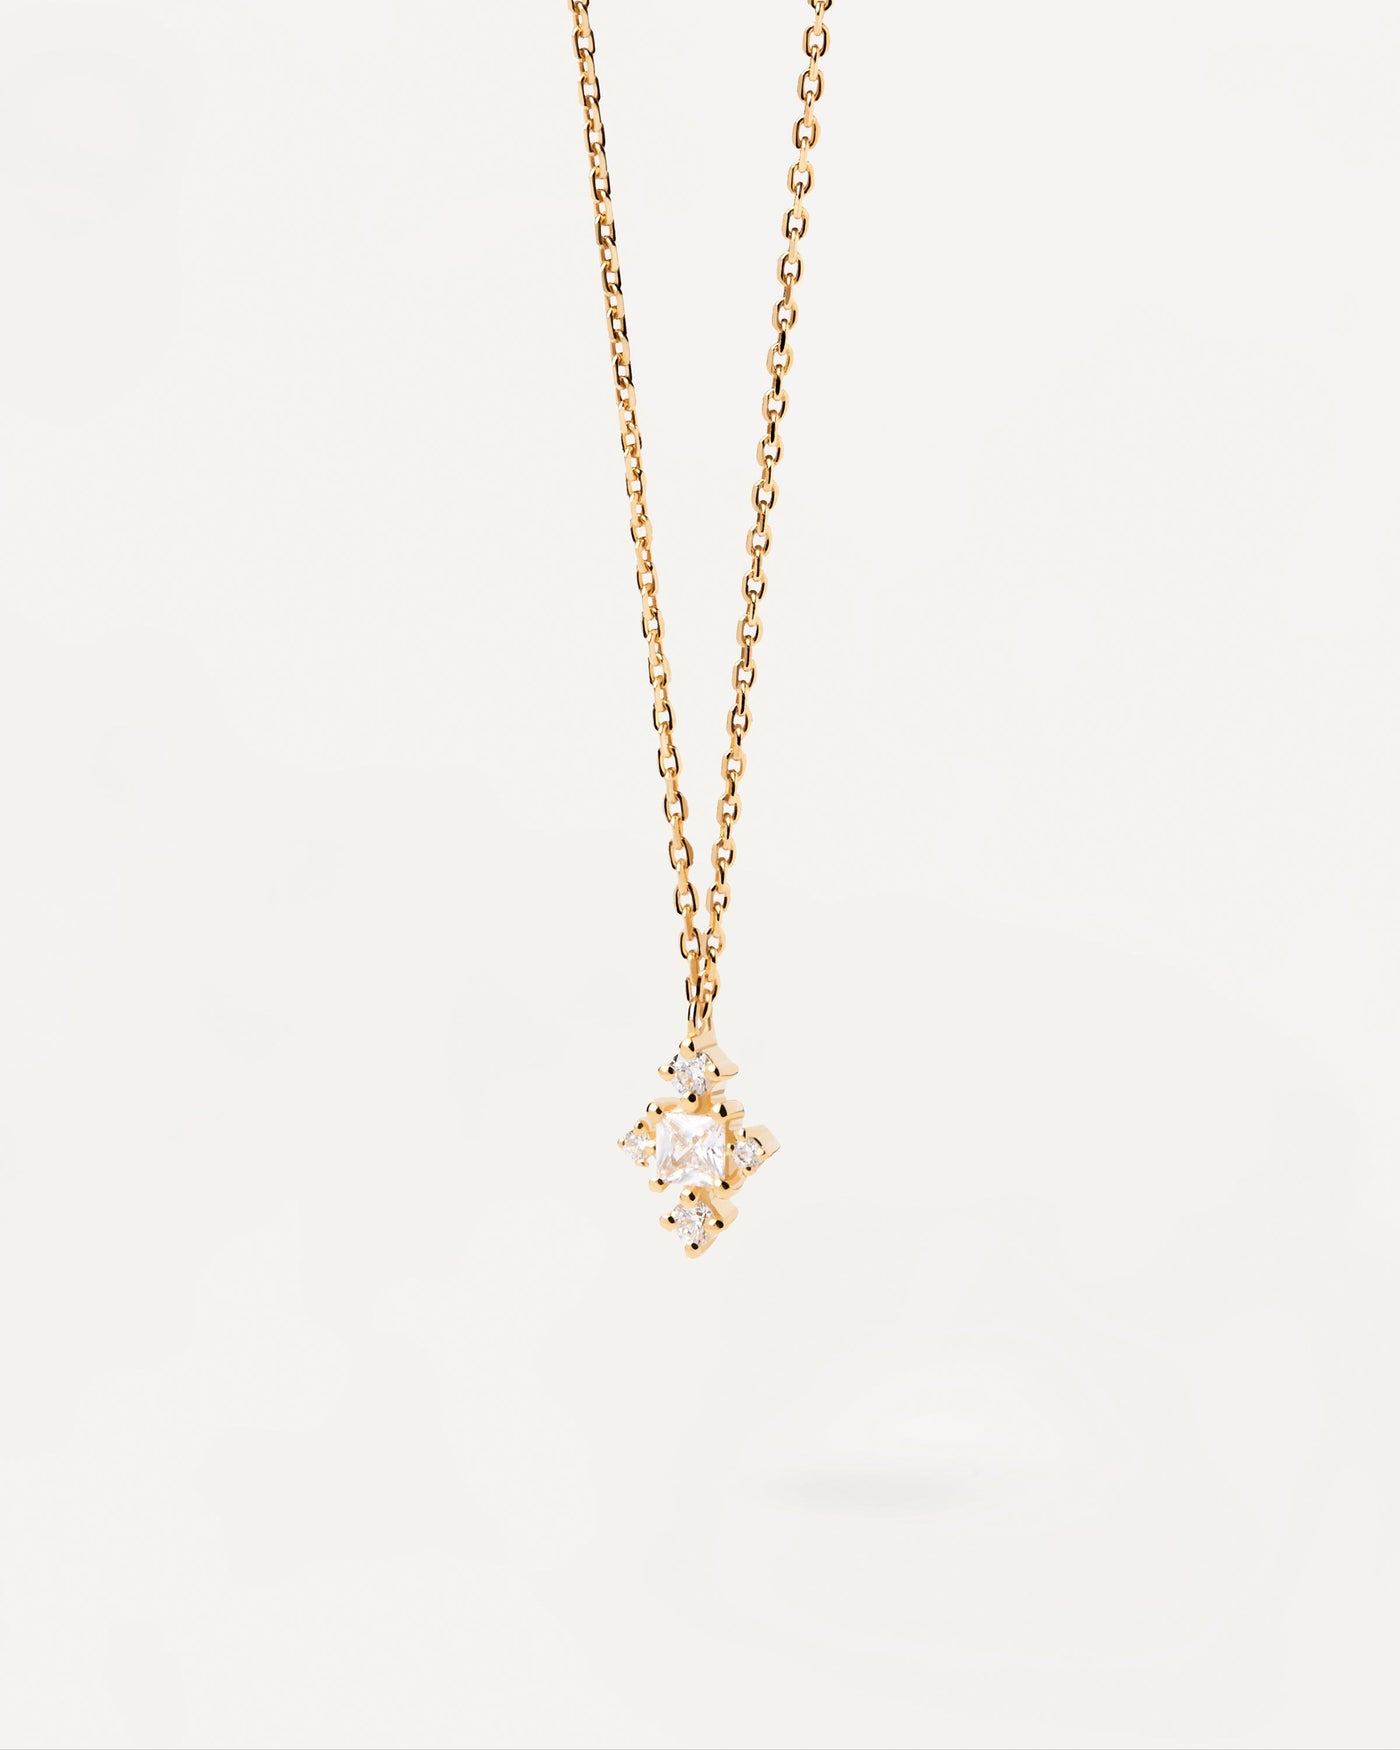 2023 Selection | Laura Necklace. Dainty gold-plated chain necklace with white zirconia motiv. Get the latest arrival from PDPAOLA. Place your order safely and get this Best Seller. Free Shipping.